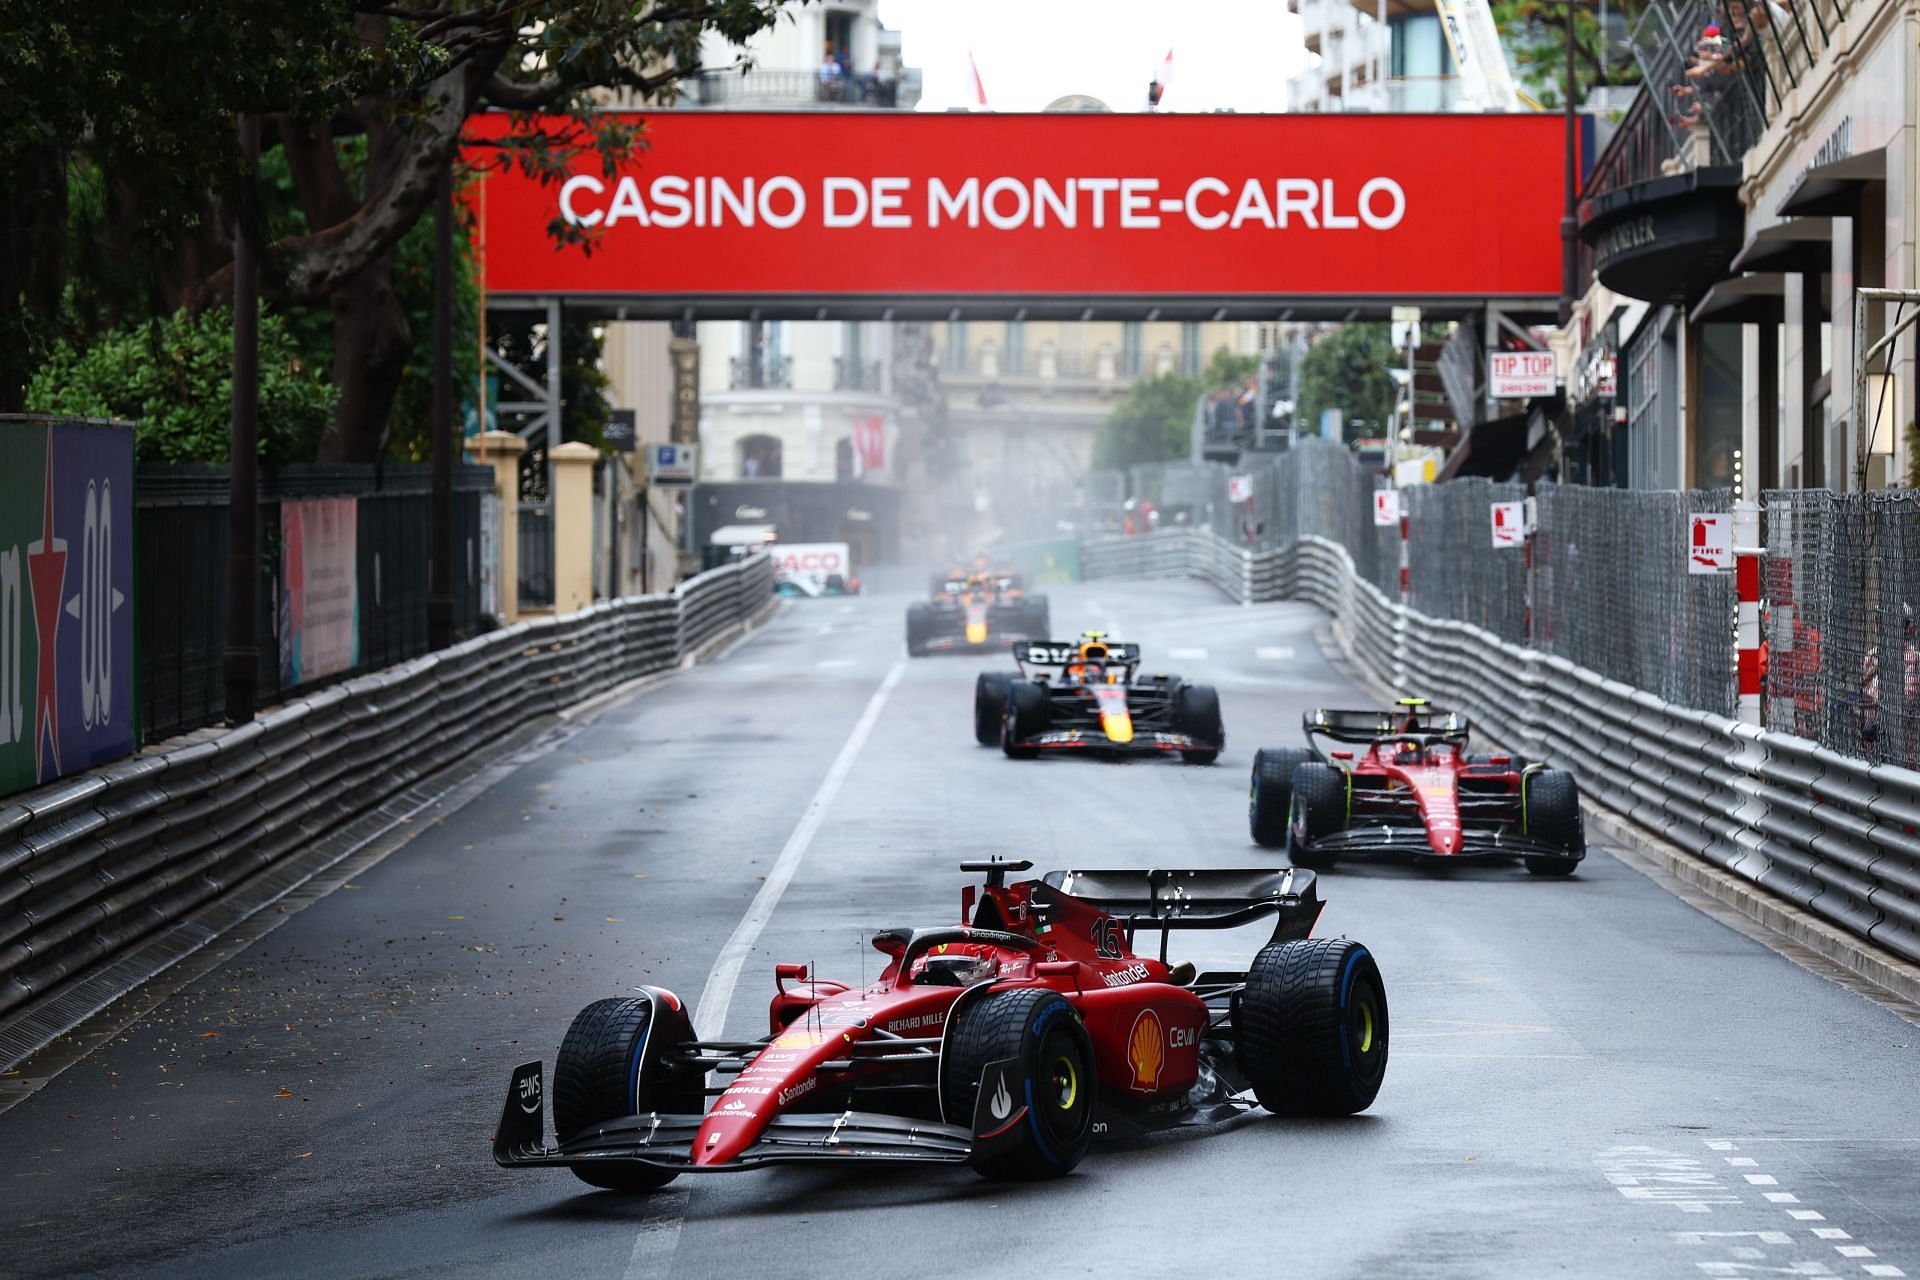 Charles Leclerc and Carlos Sainz of Ferrari driving during the F1 Grand Prix of Monaco (Photo by Clive Rose/Getty Images)